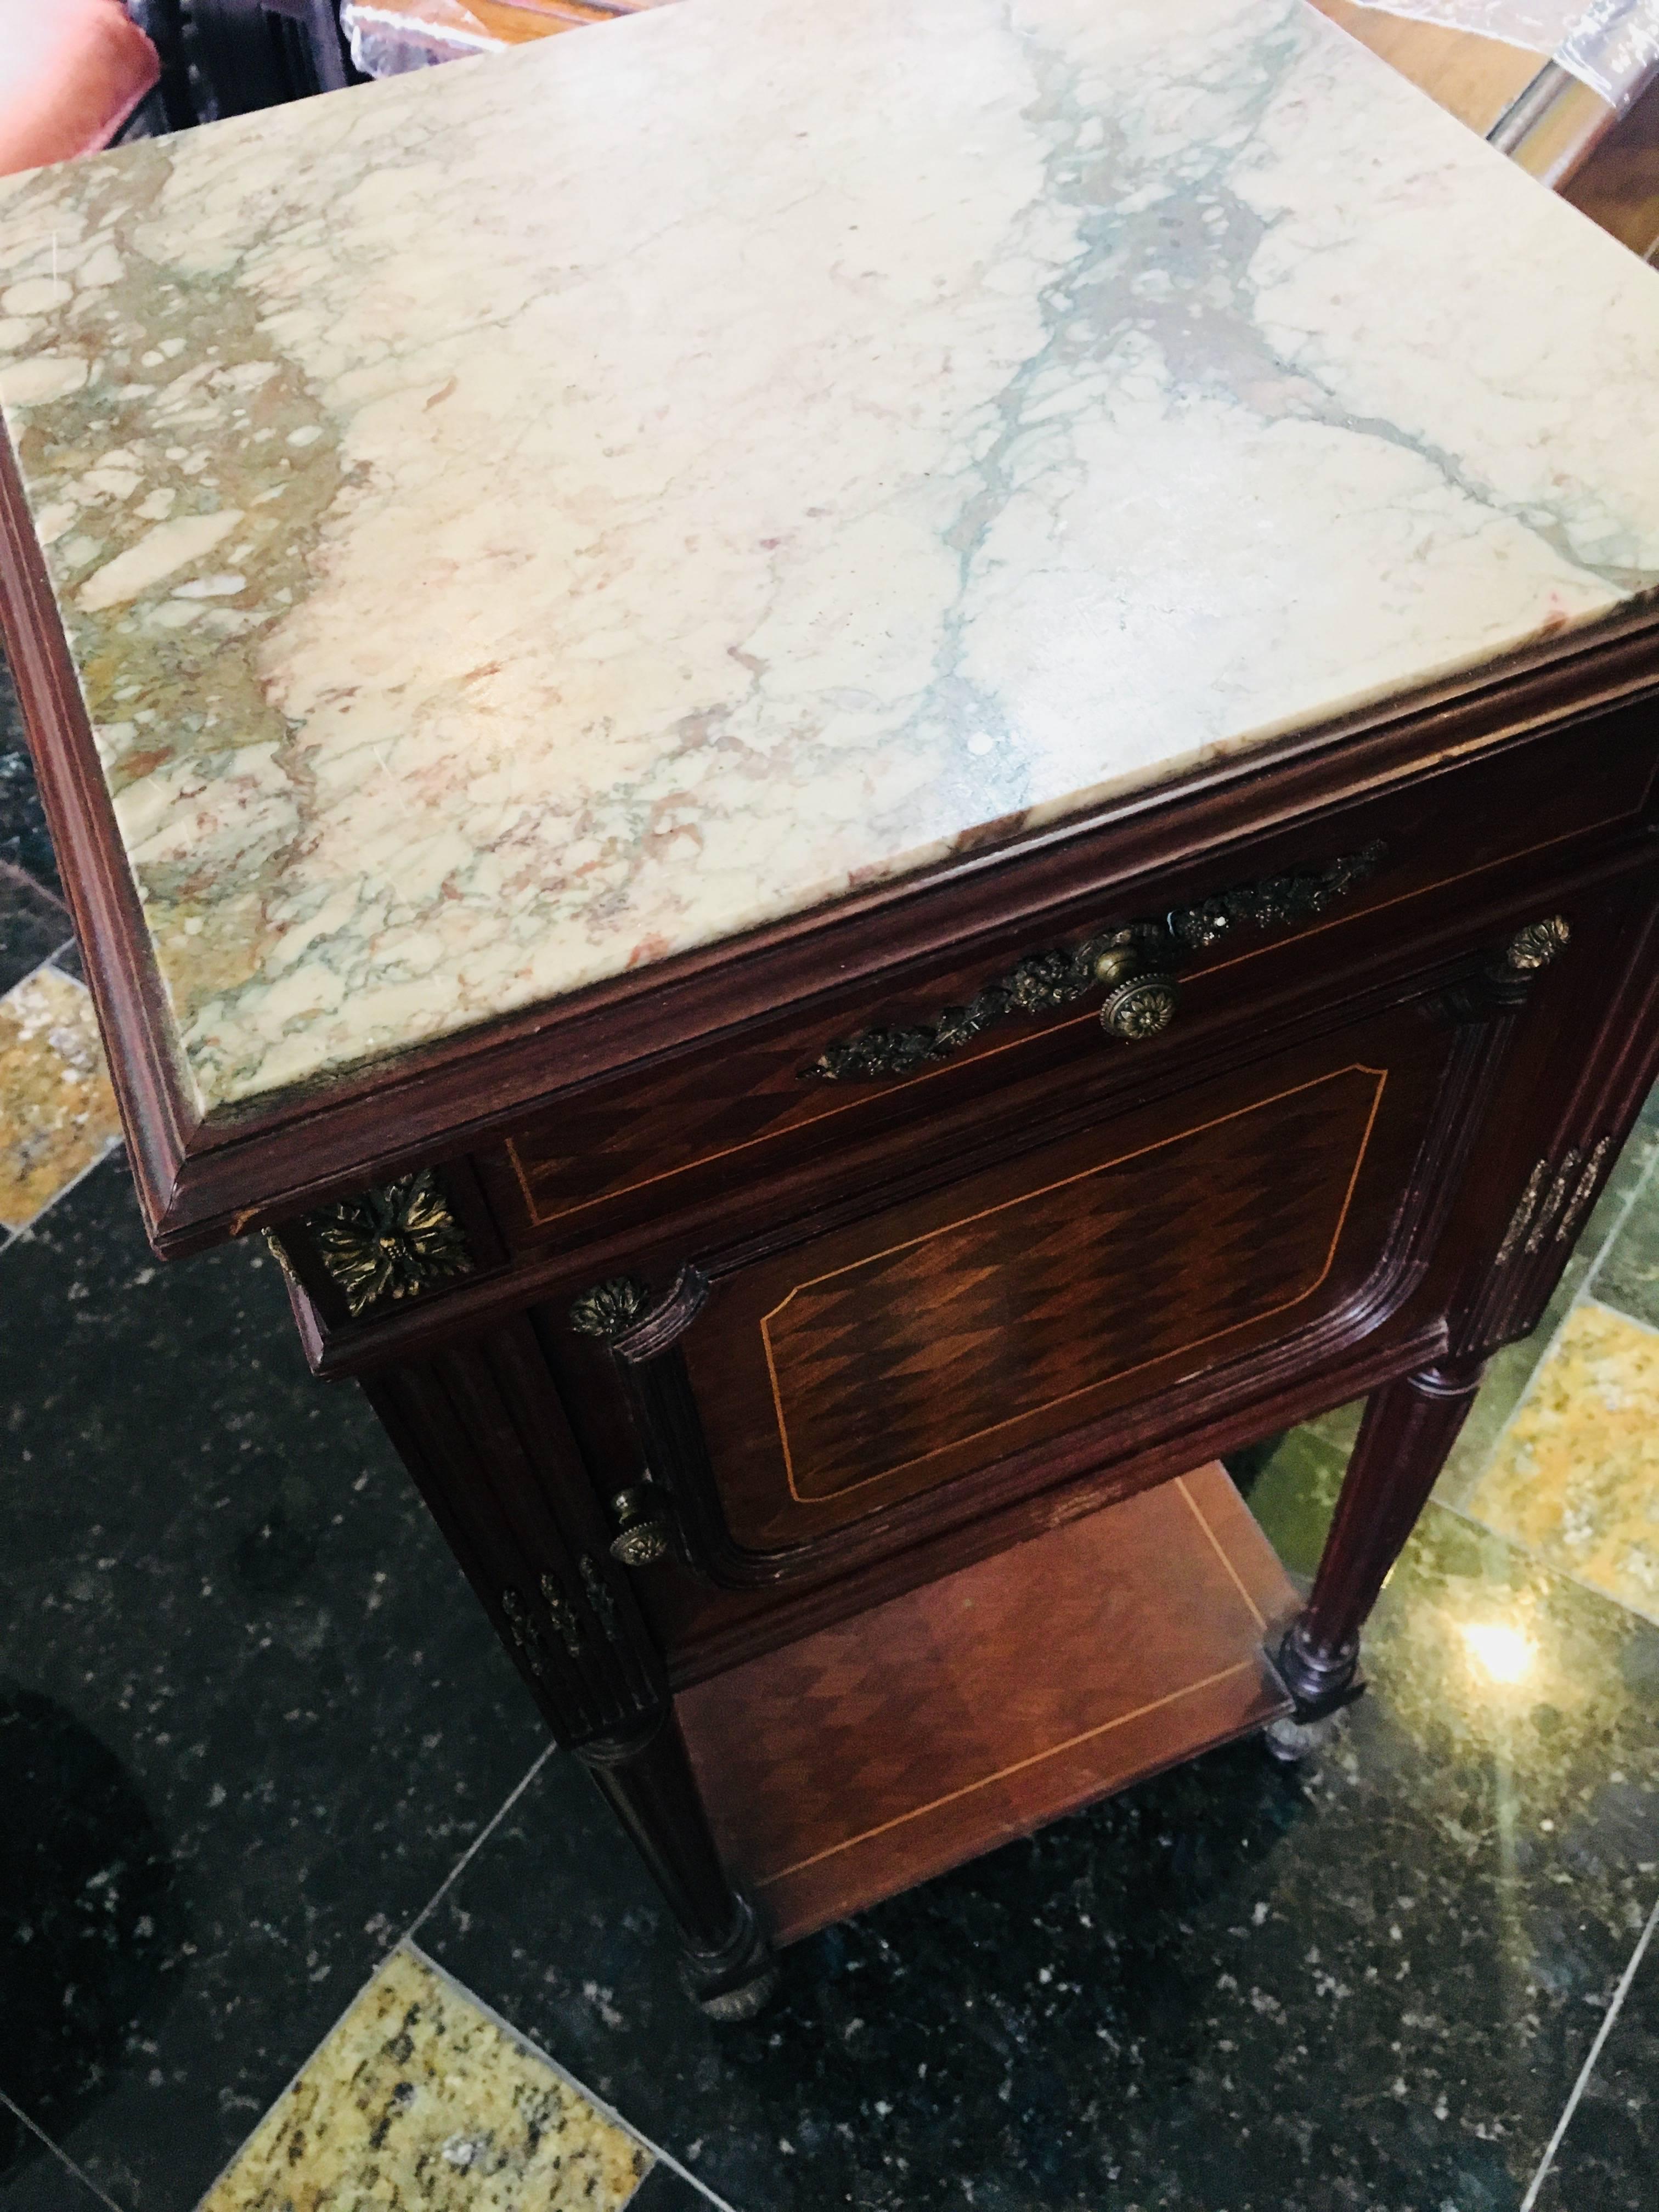 19th century mahogany marble-top nightstand with bronze decoration.
France, circa 1870.